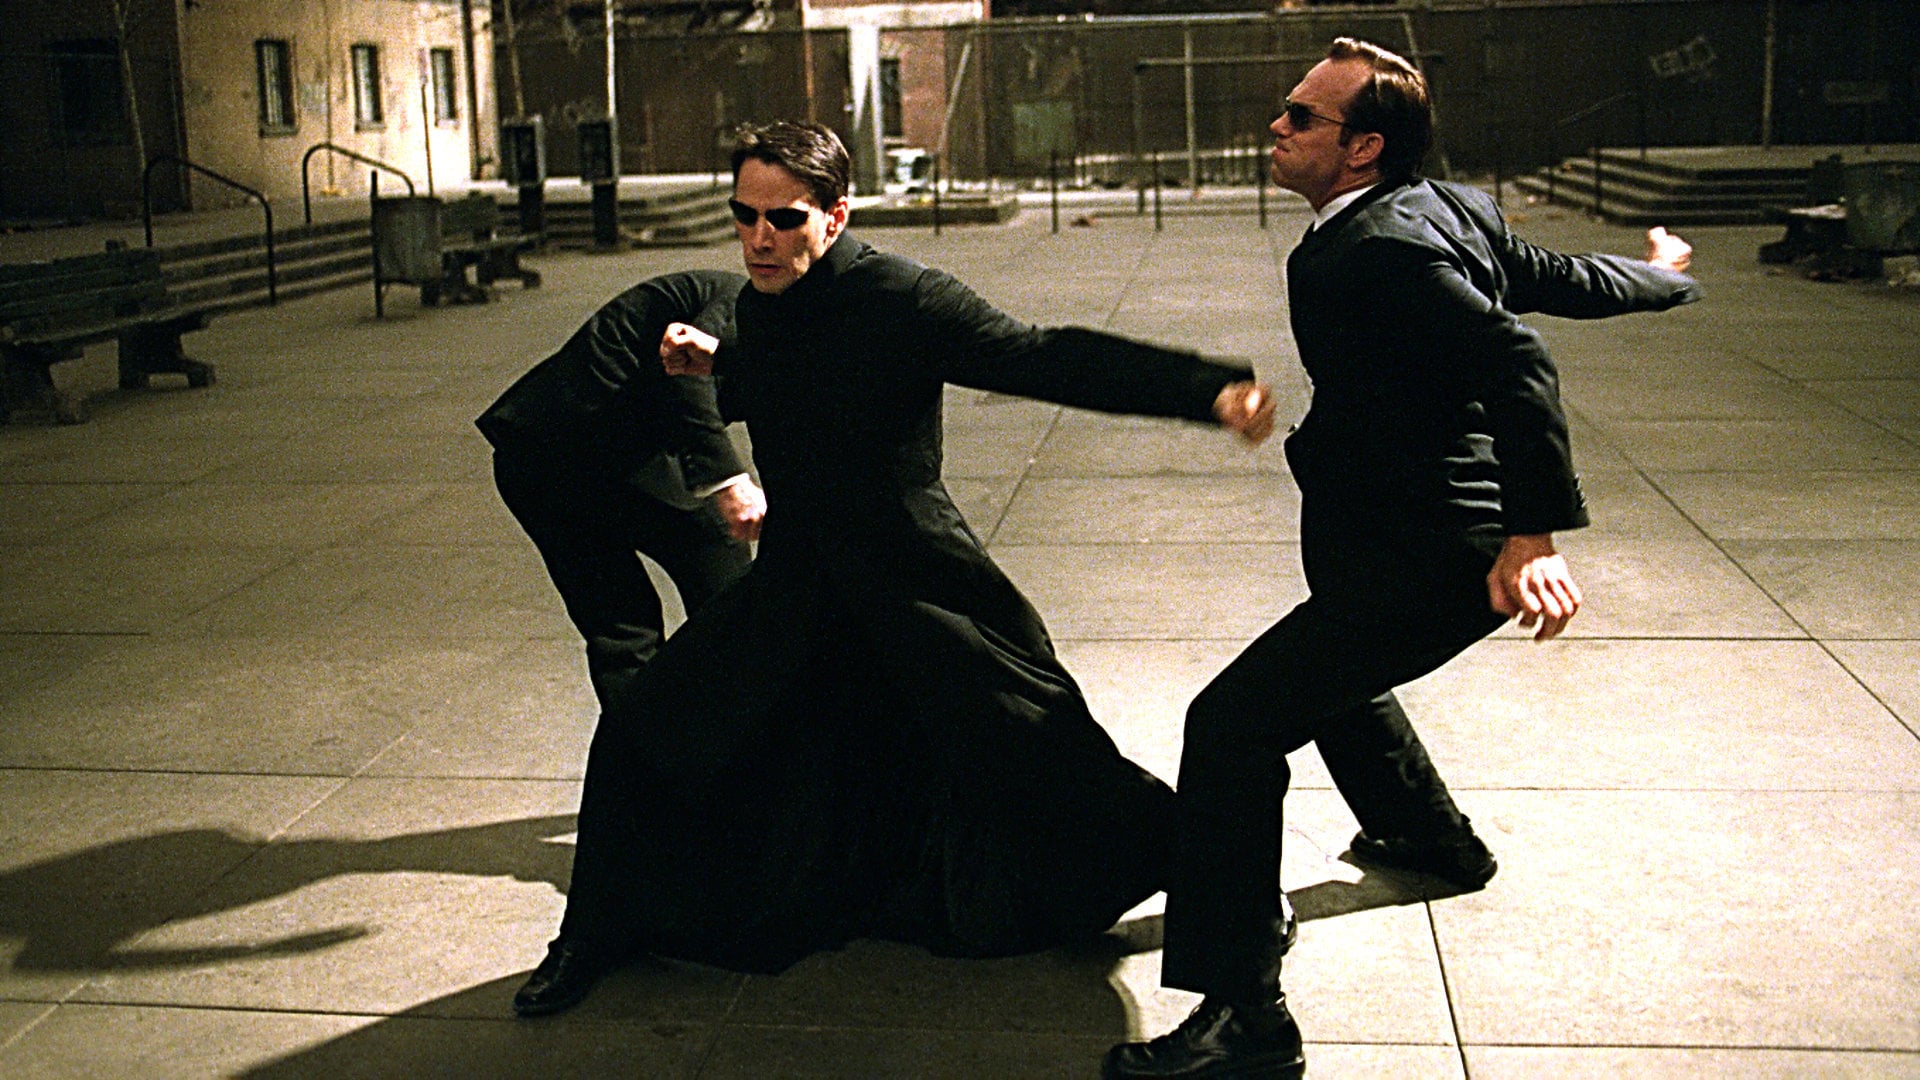 My Review of The Matrix: Reloaded